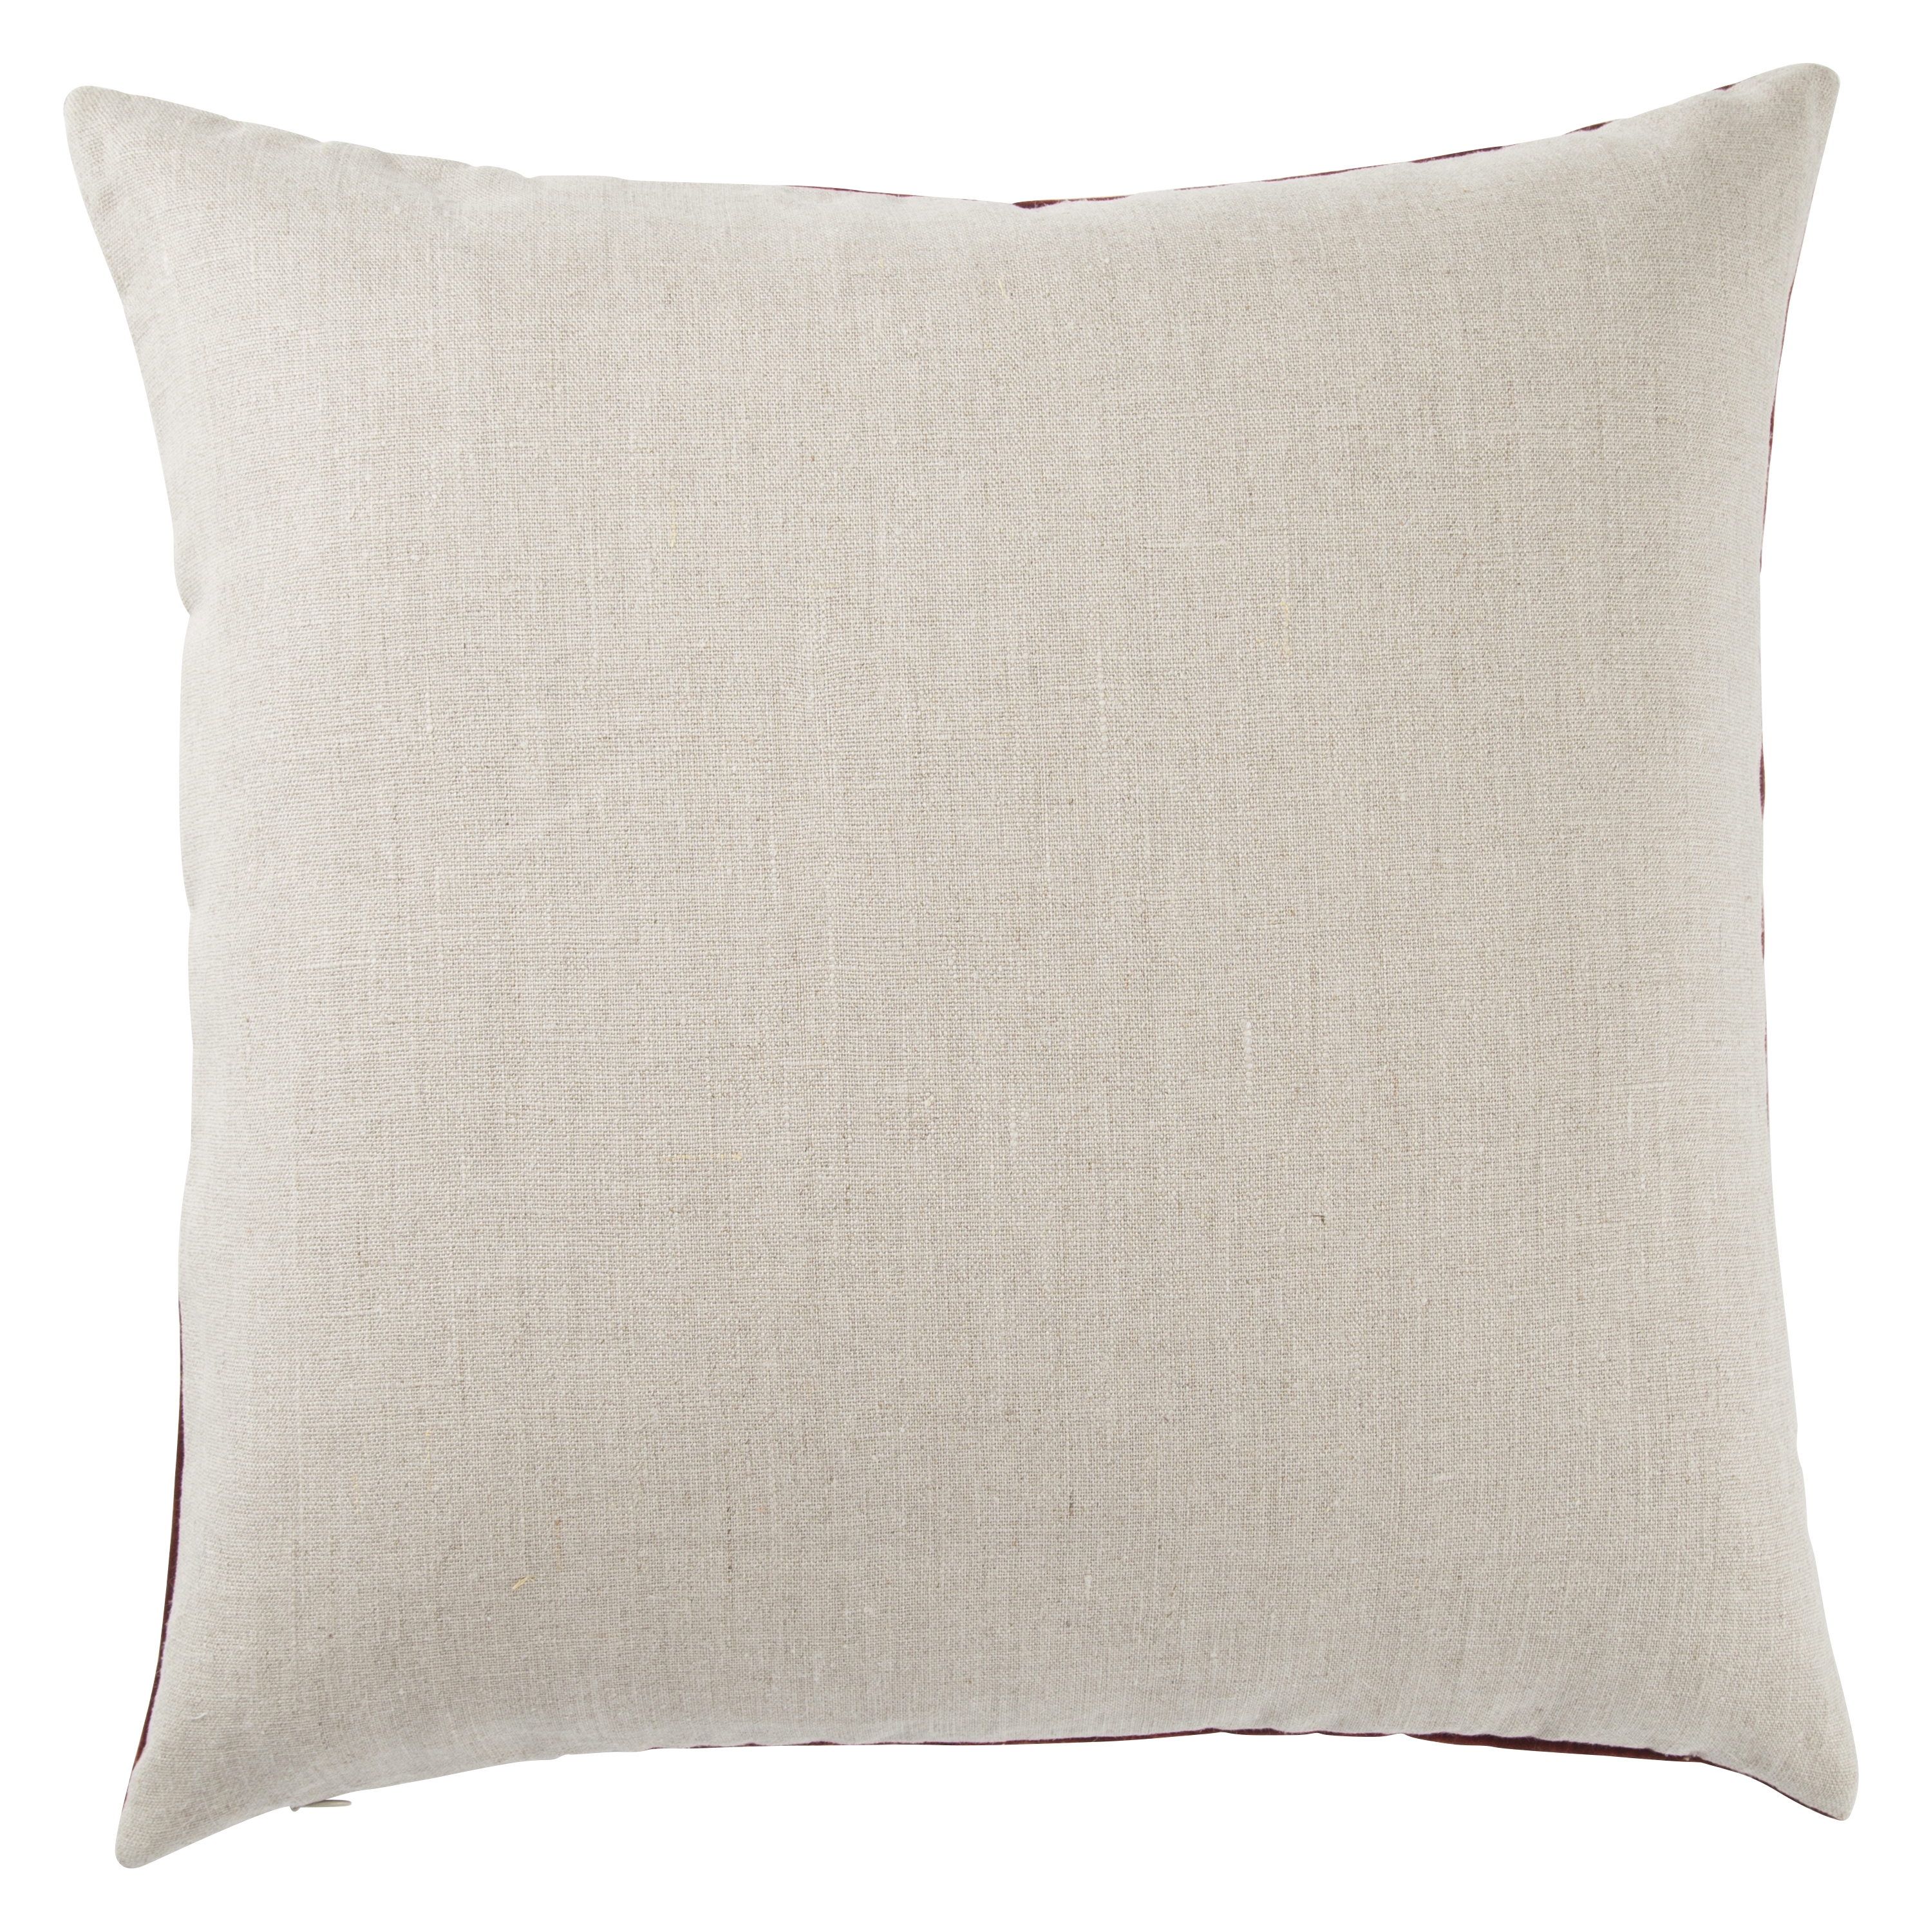 Design (US) Red 20"X20" Pillow - Image 1